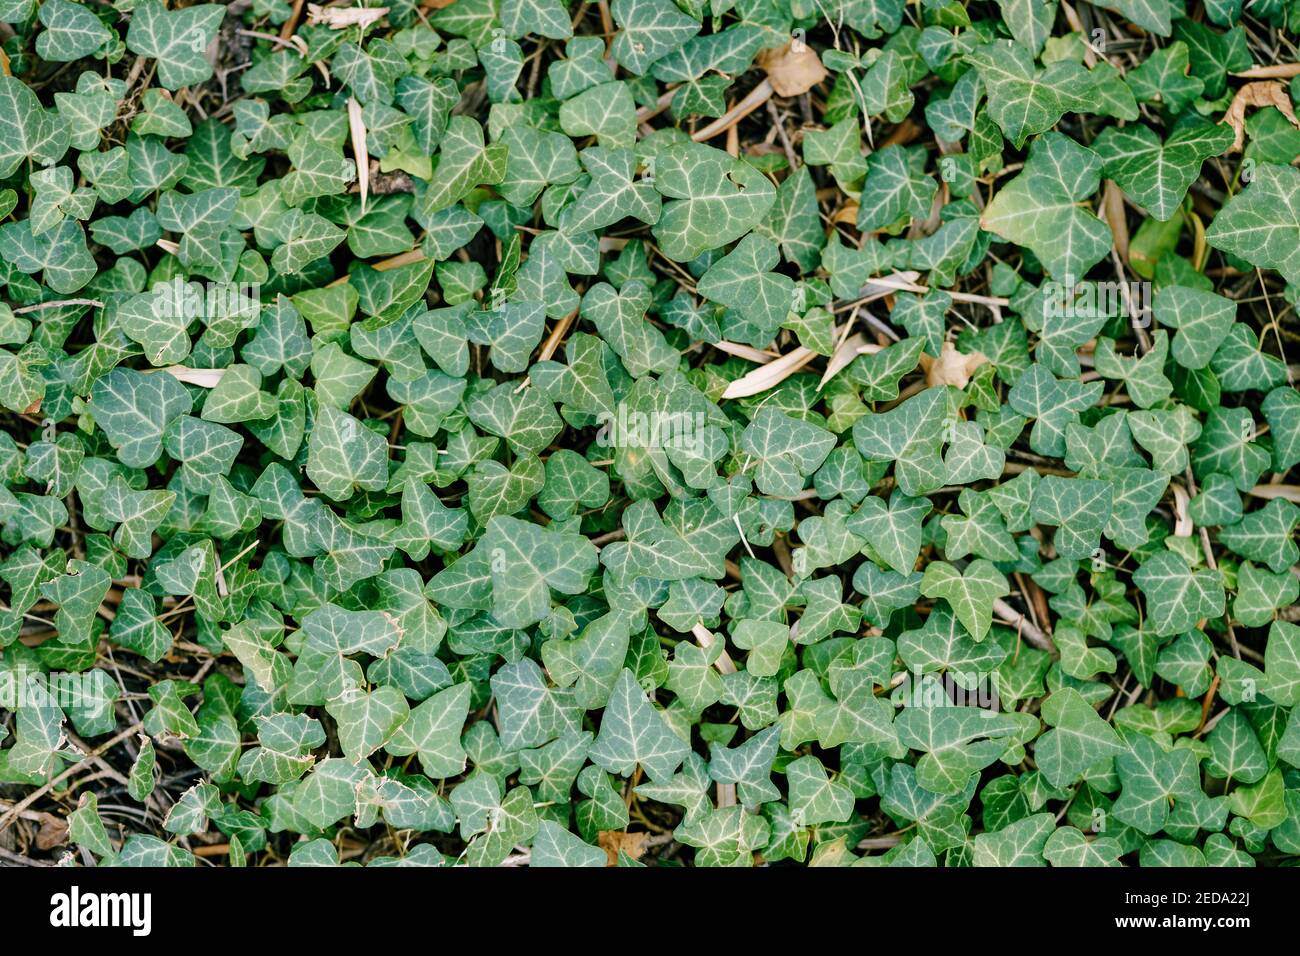 Close-up of a carpet of ivy leaves on the ground with twigs and dry leaves. Stock Photo